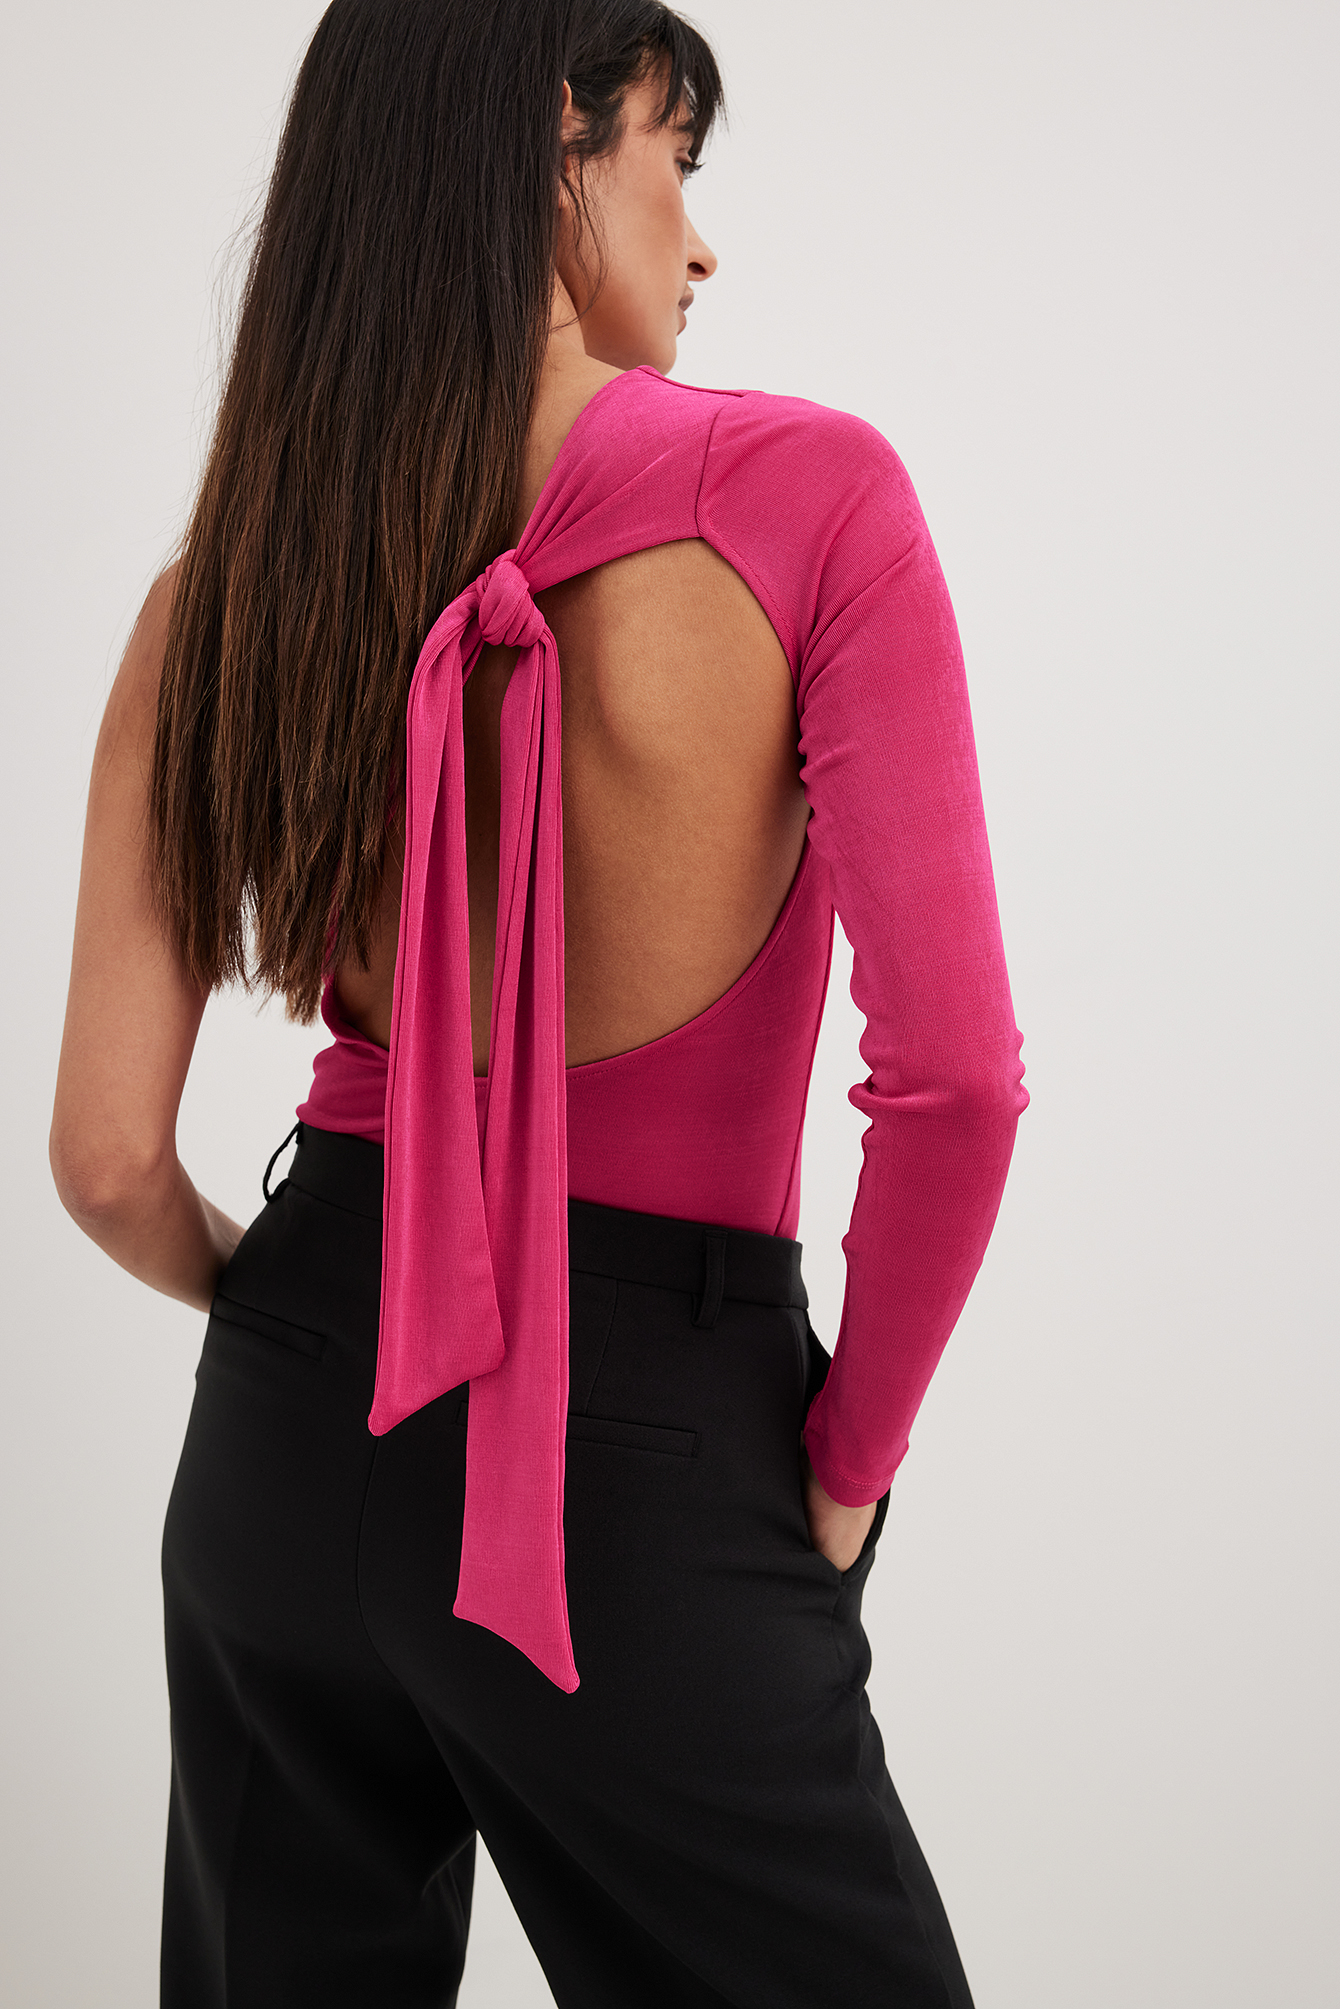 Womens Pink One Shoulder Tops